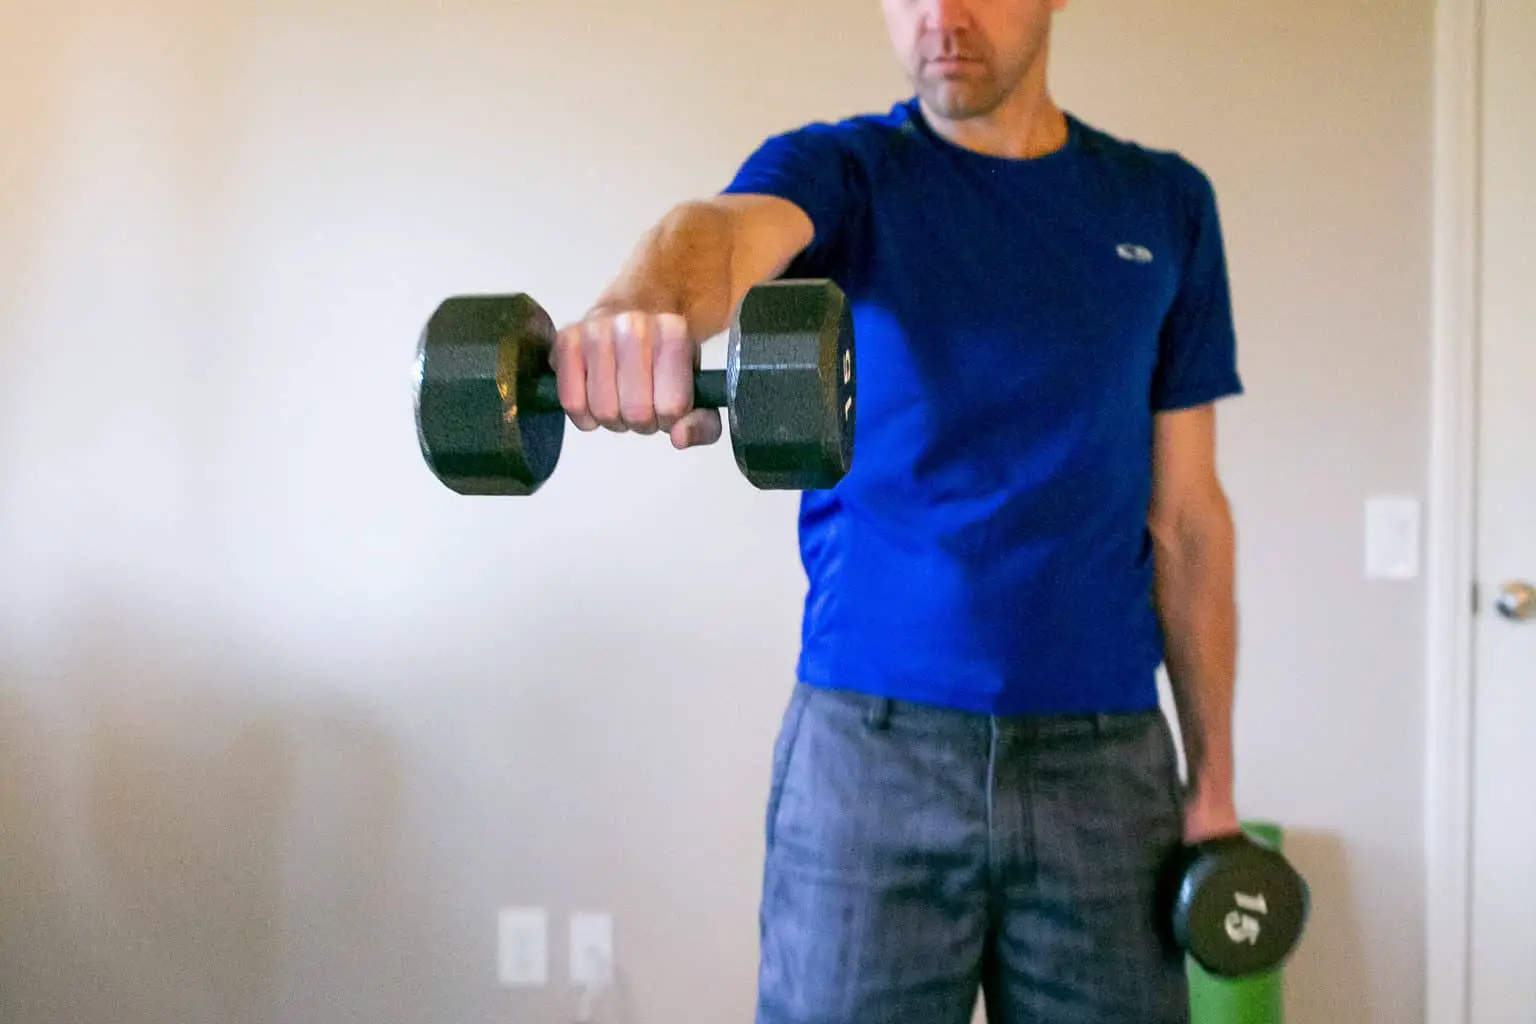 Man lifting a dumbbell across his chest while holding the other one near his sides